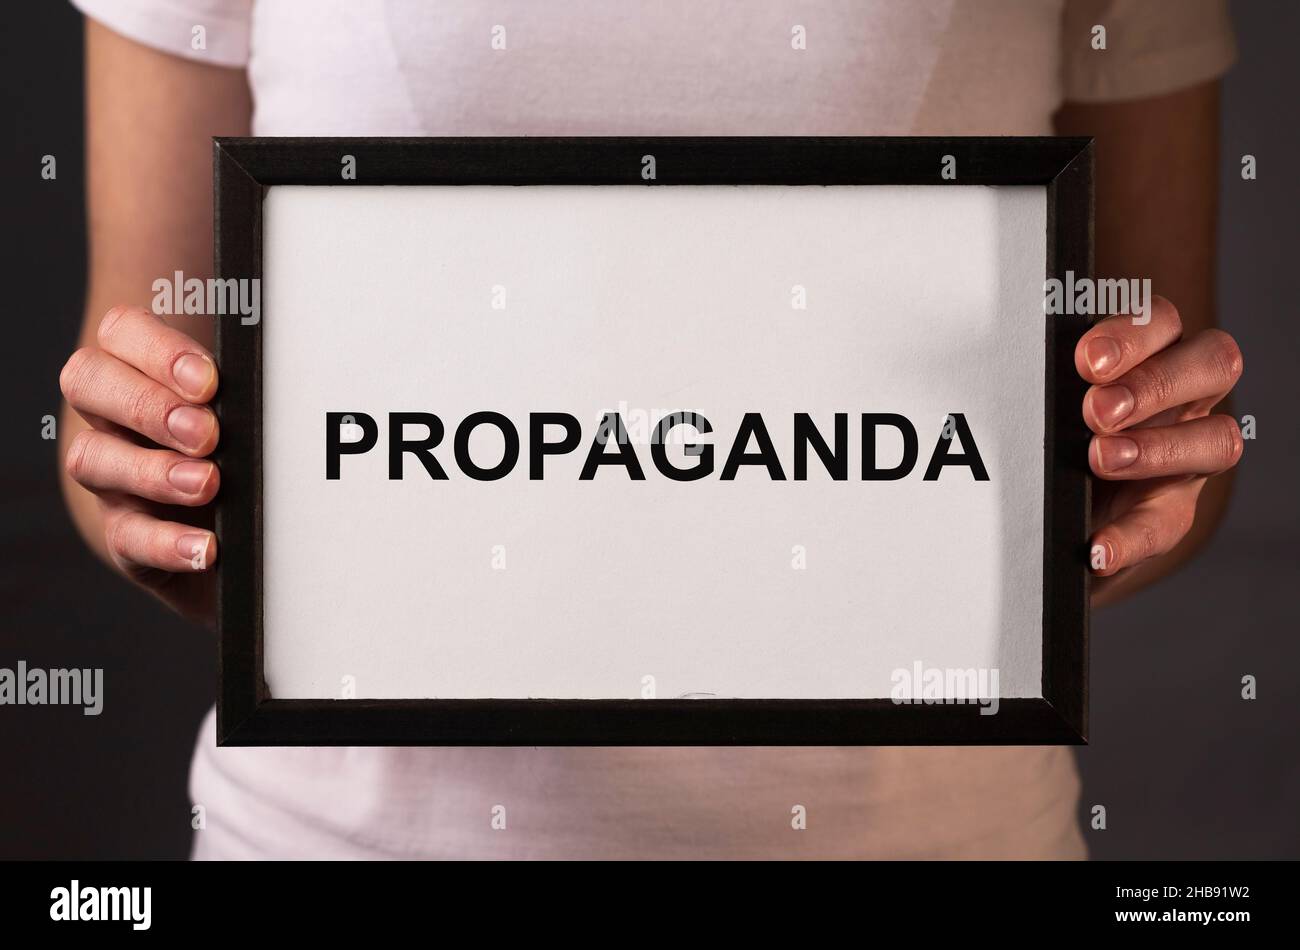 Propaganda word on paper. Manipulation and brainwash campaign by media concept. Stock Photo